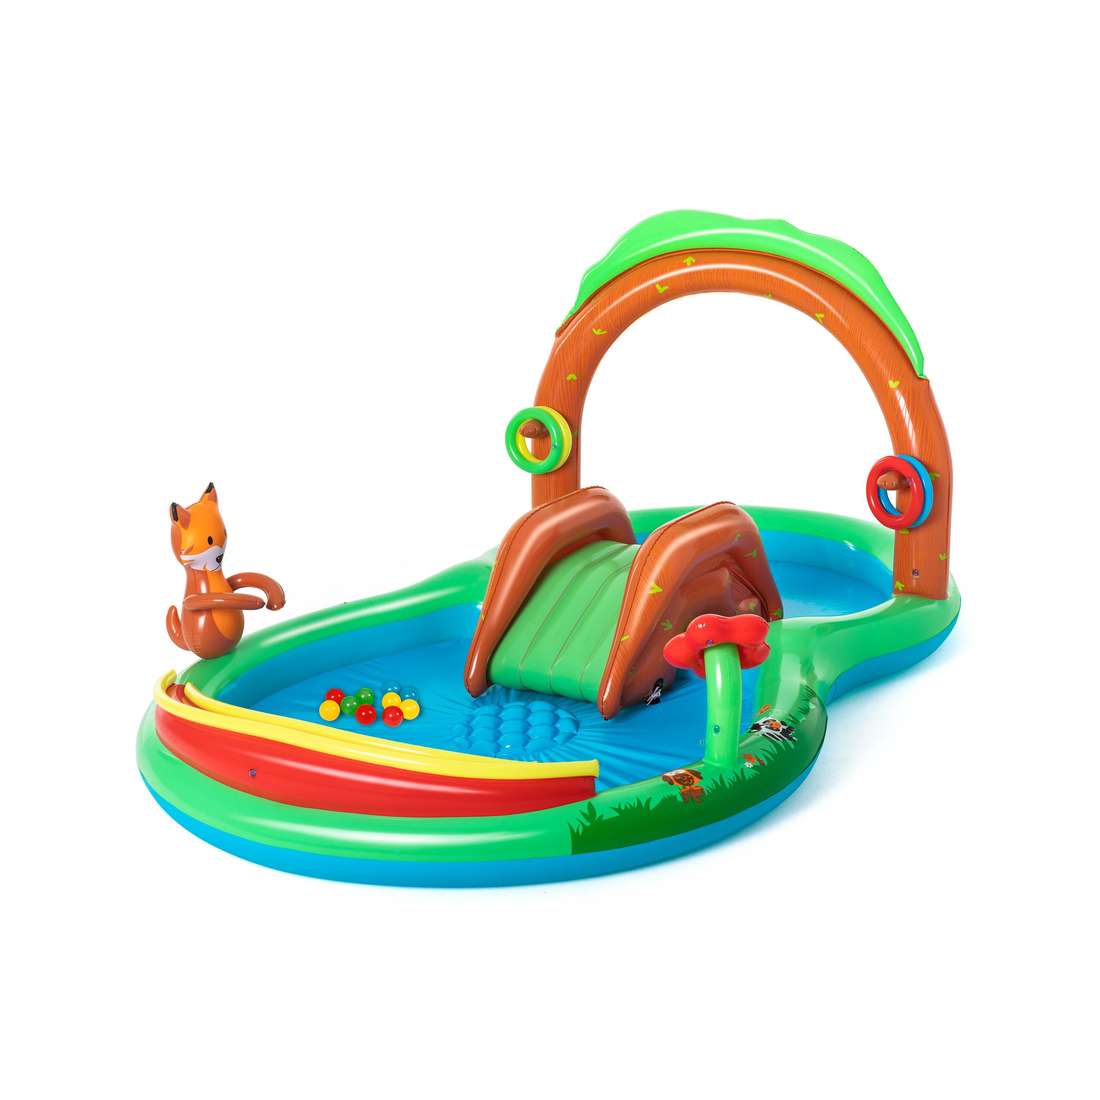 INFLATABLE PLAY POOL 2.95M X 1.99M X 1.30M - best price from Maltashopper.com BR500012651